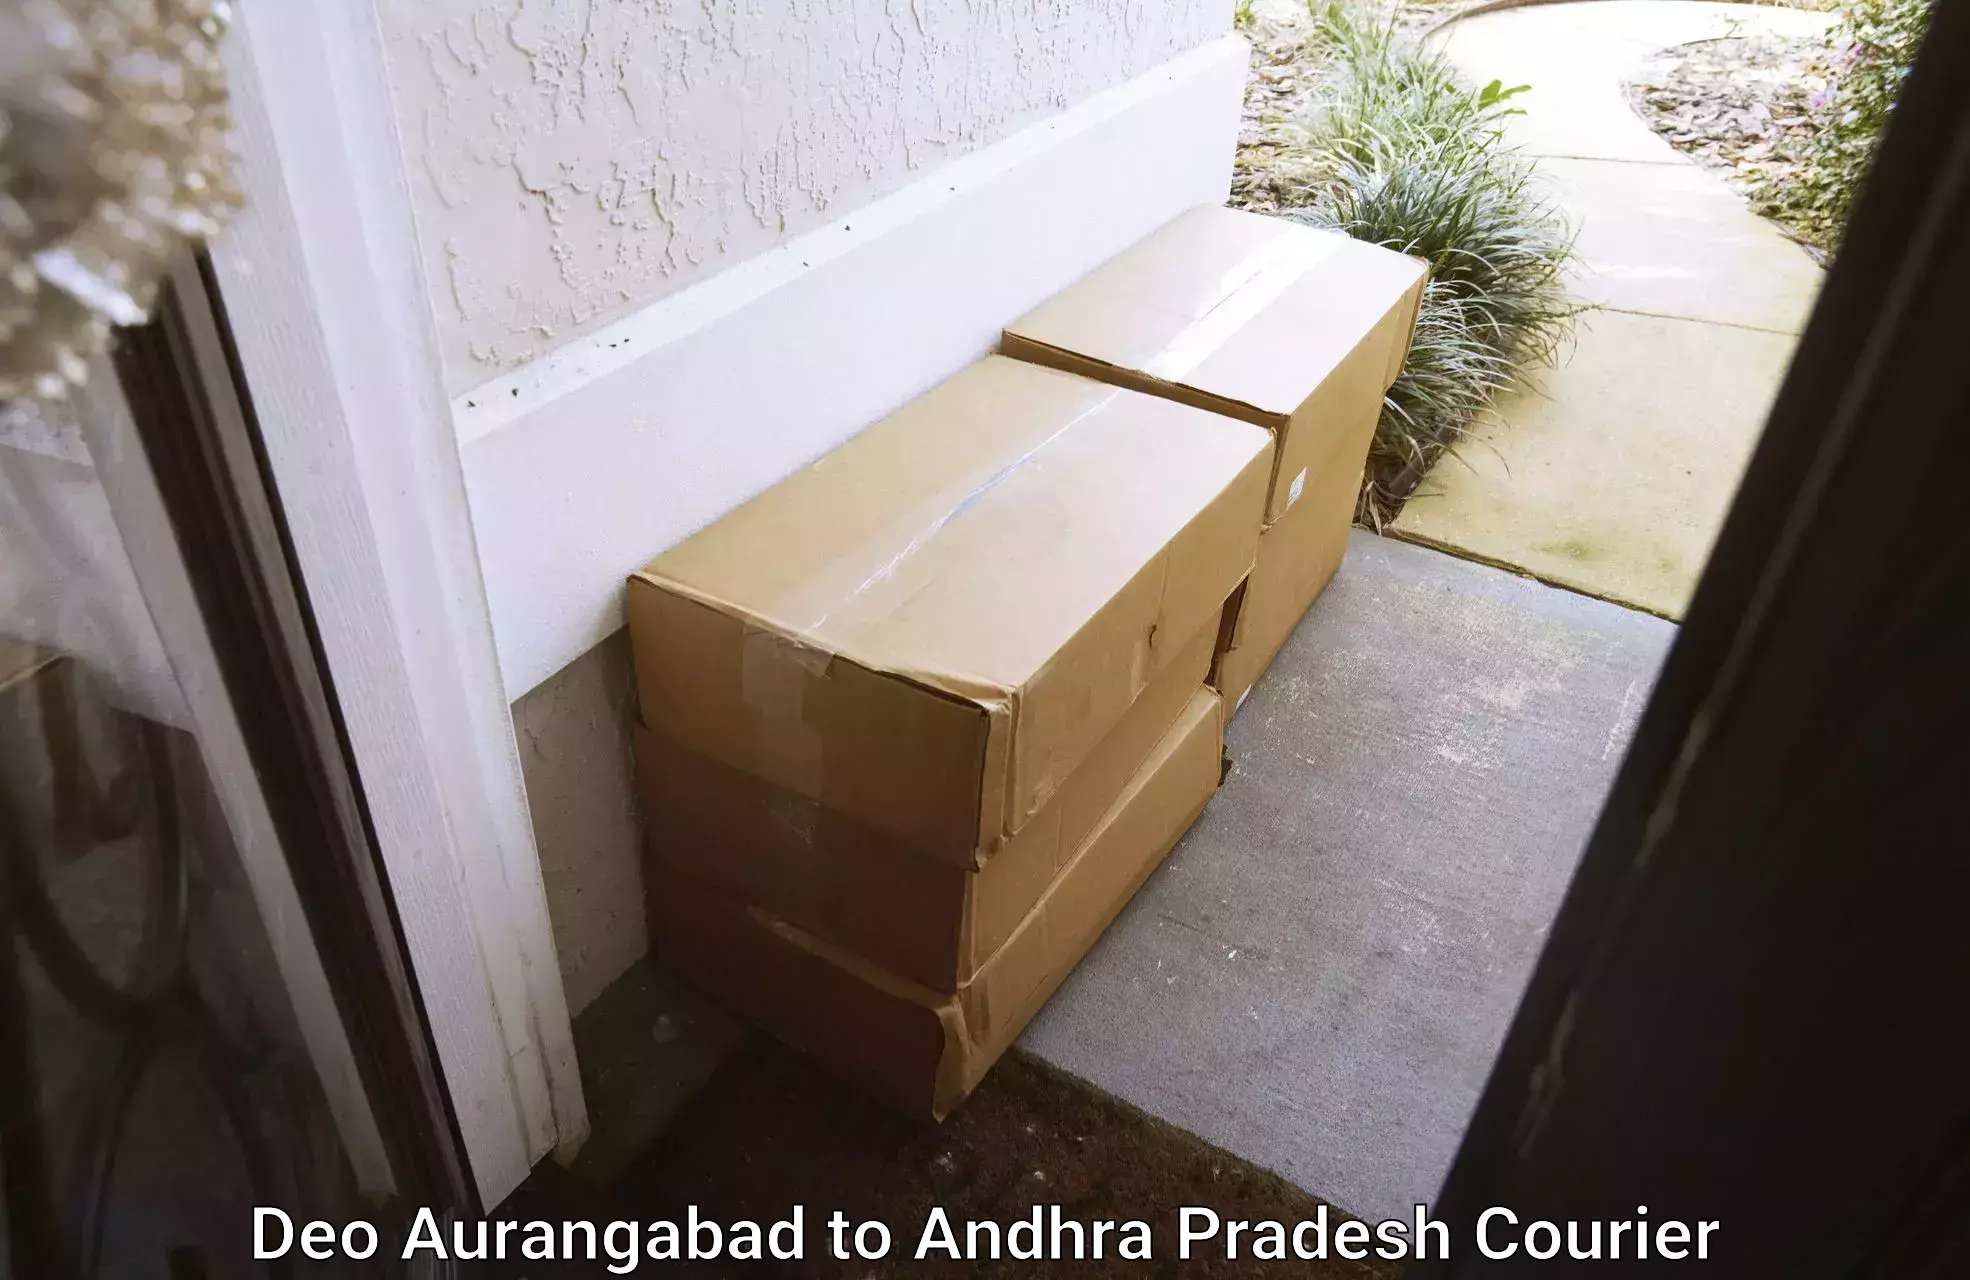 Reliable moving assistance Deo Aurangabad to Dachepalle